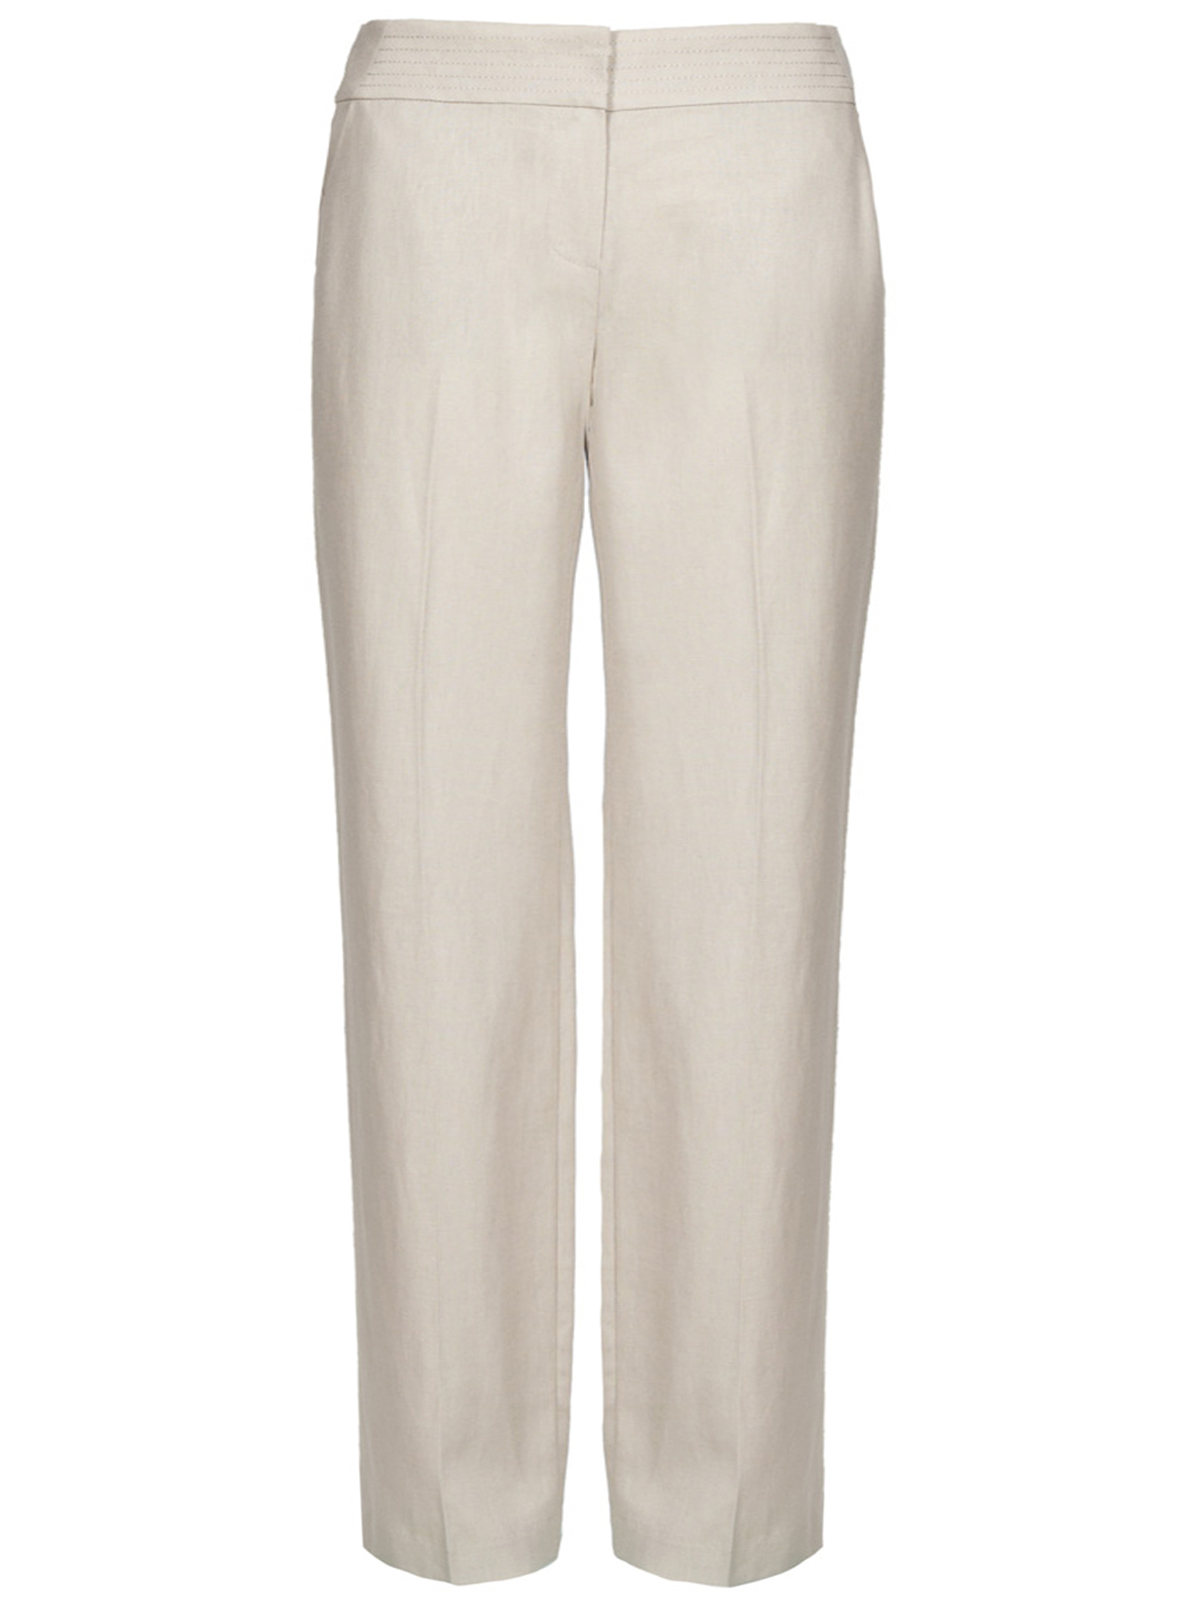 Marks and Spencer - - M&5 STONE Linen Blend Wide Waistband Trousers ...